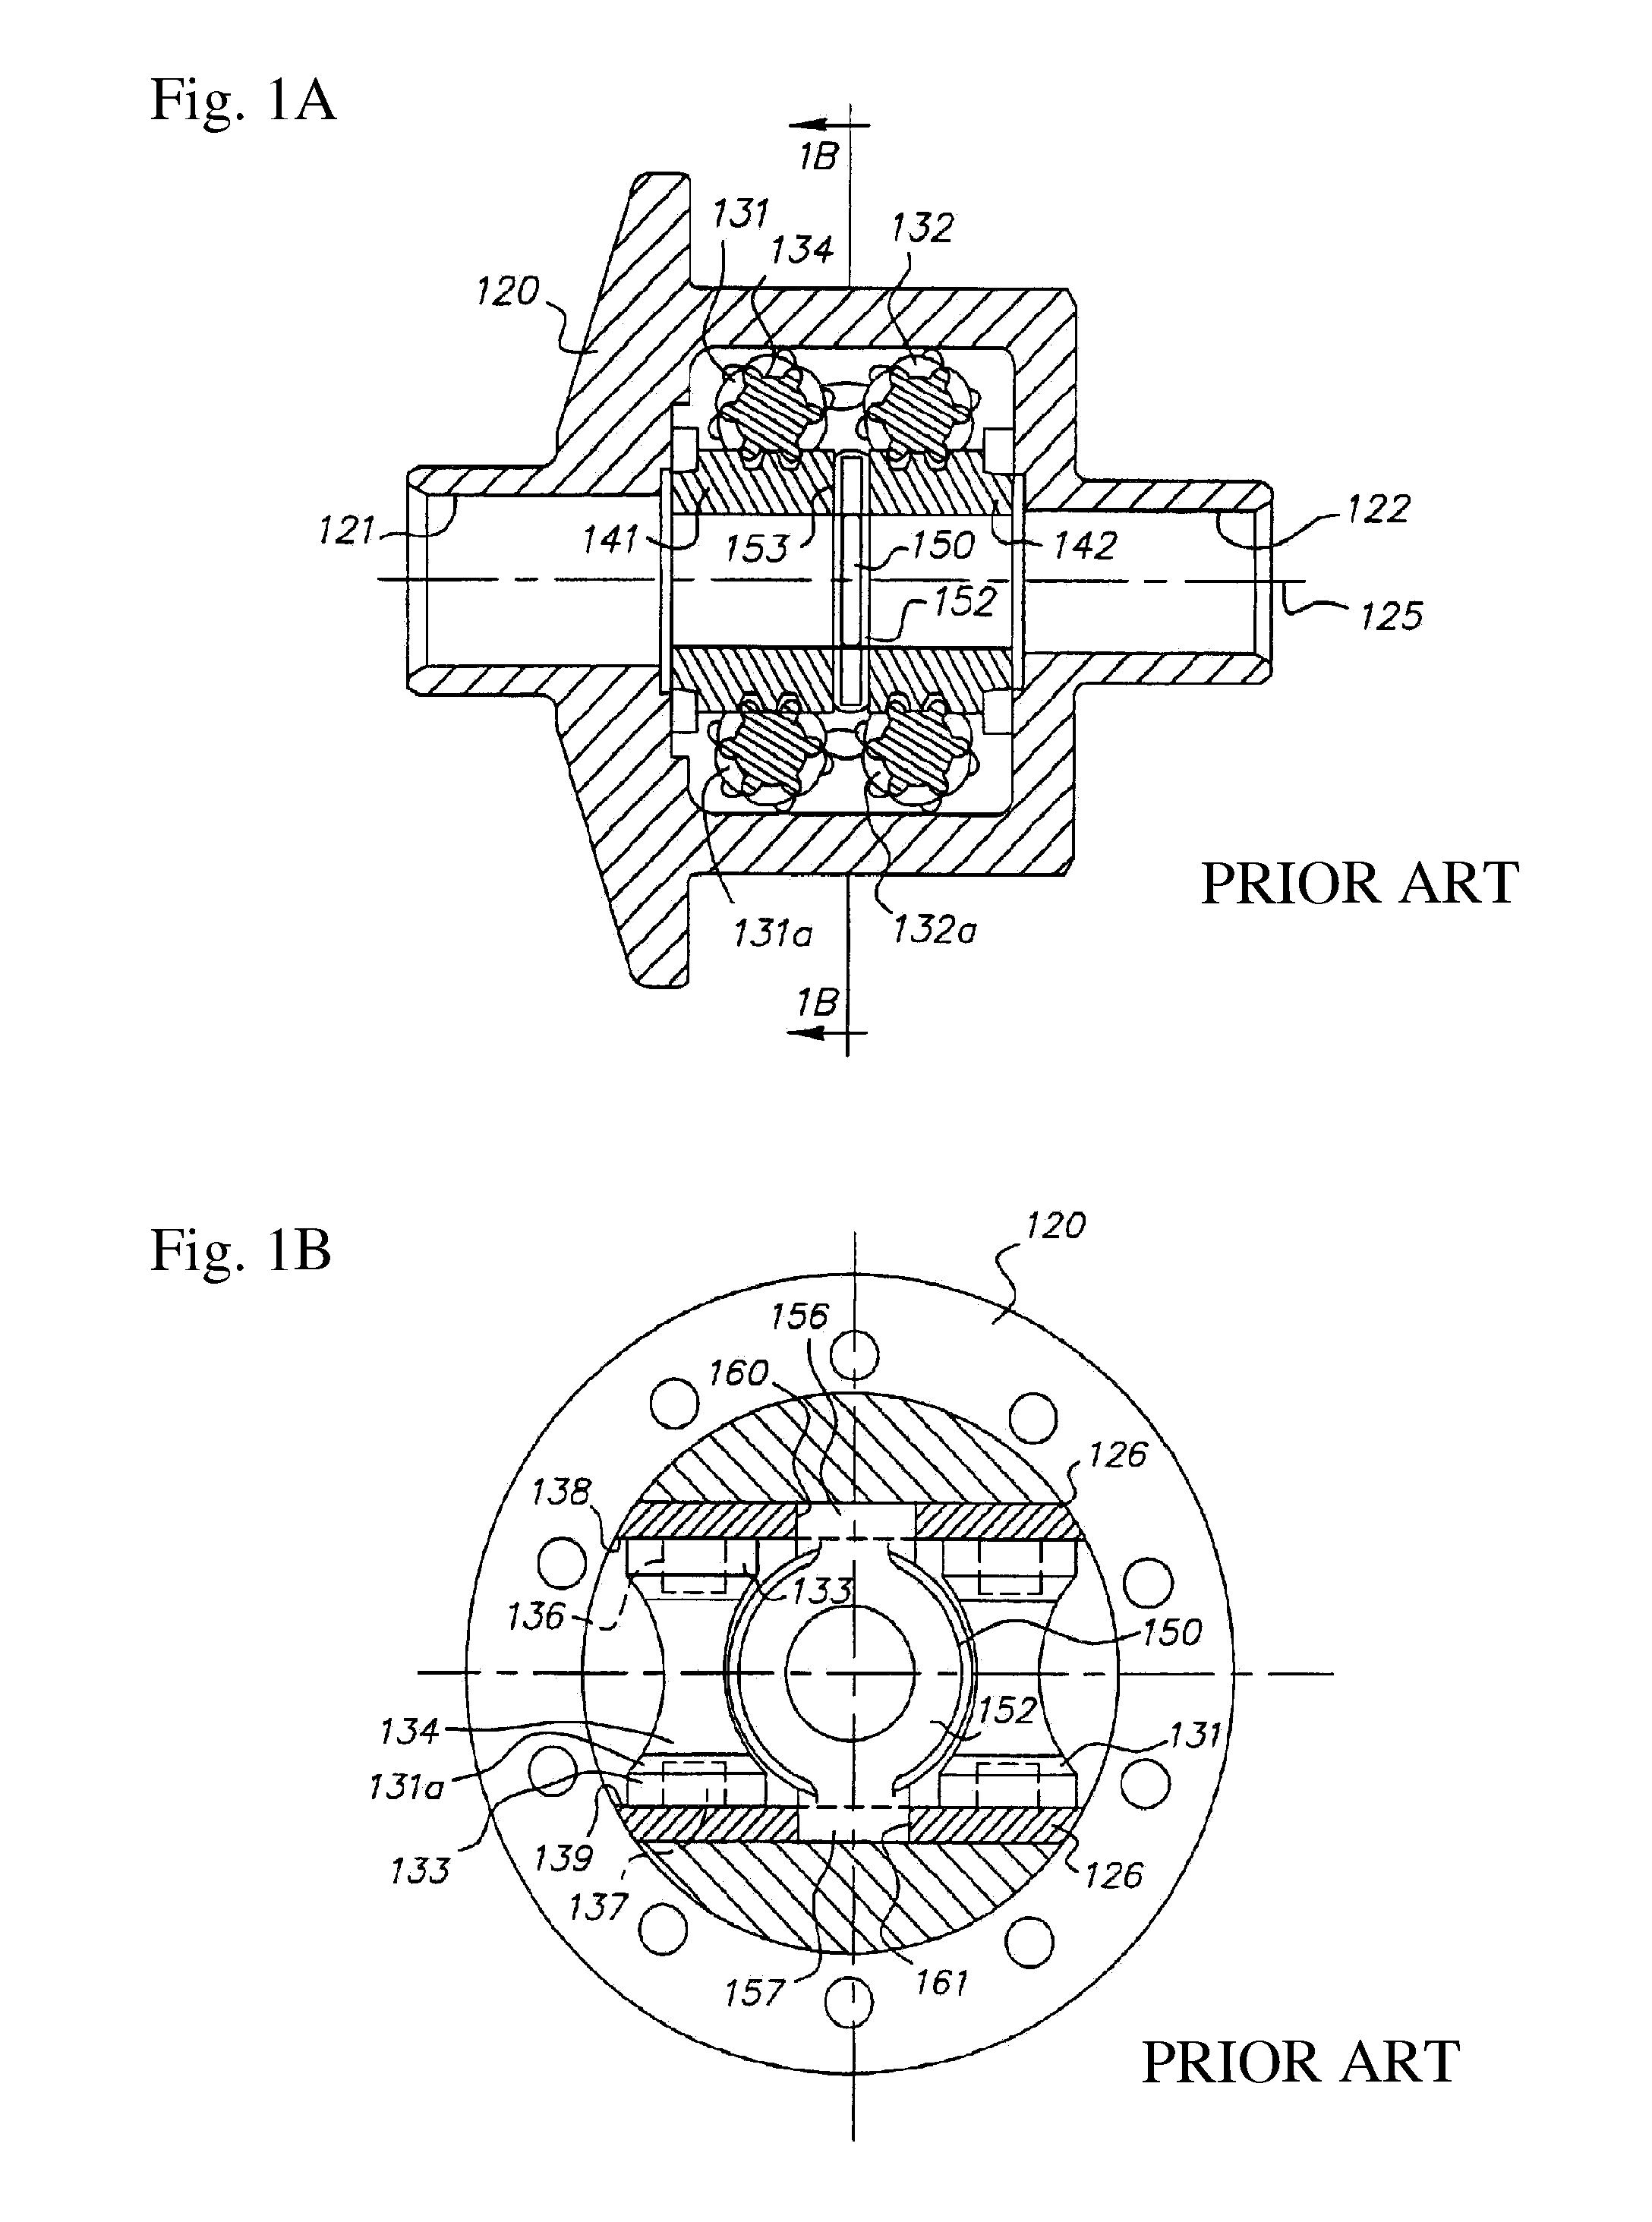 Full traction differential with hybrid gearing